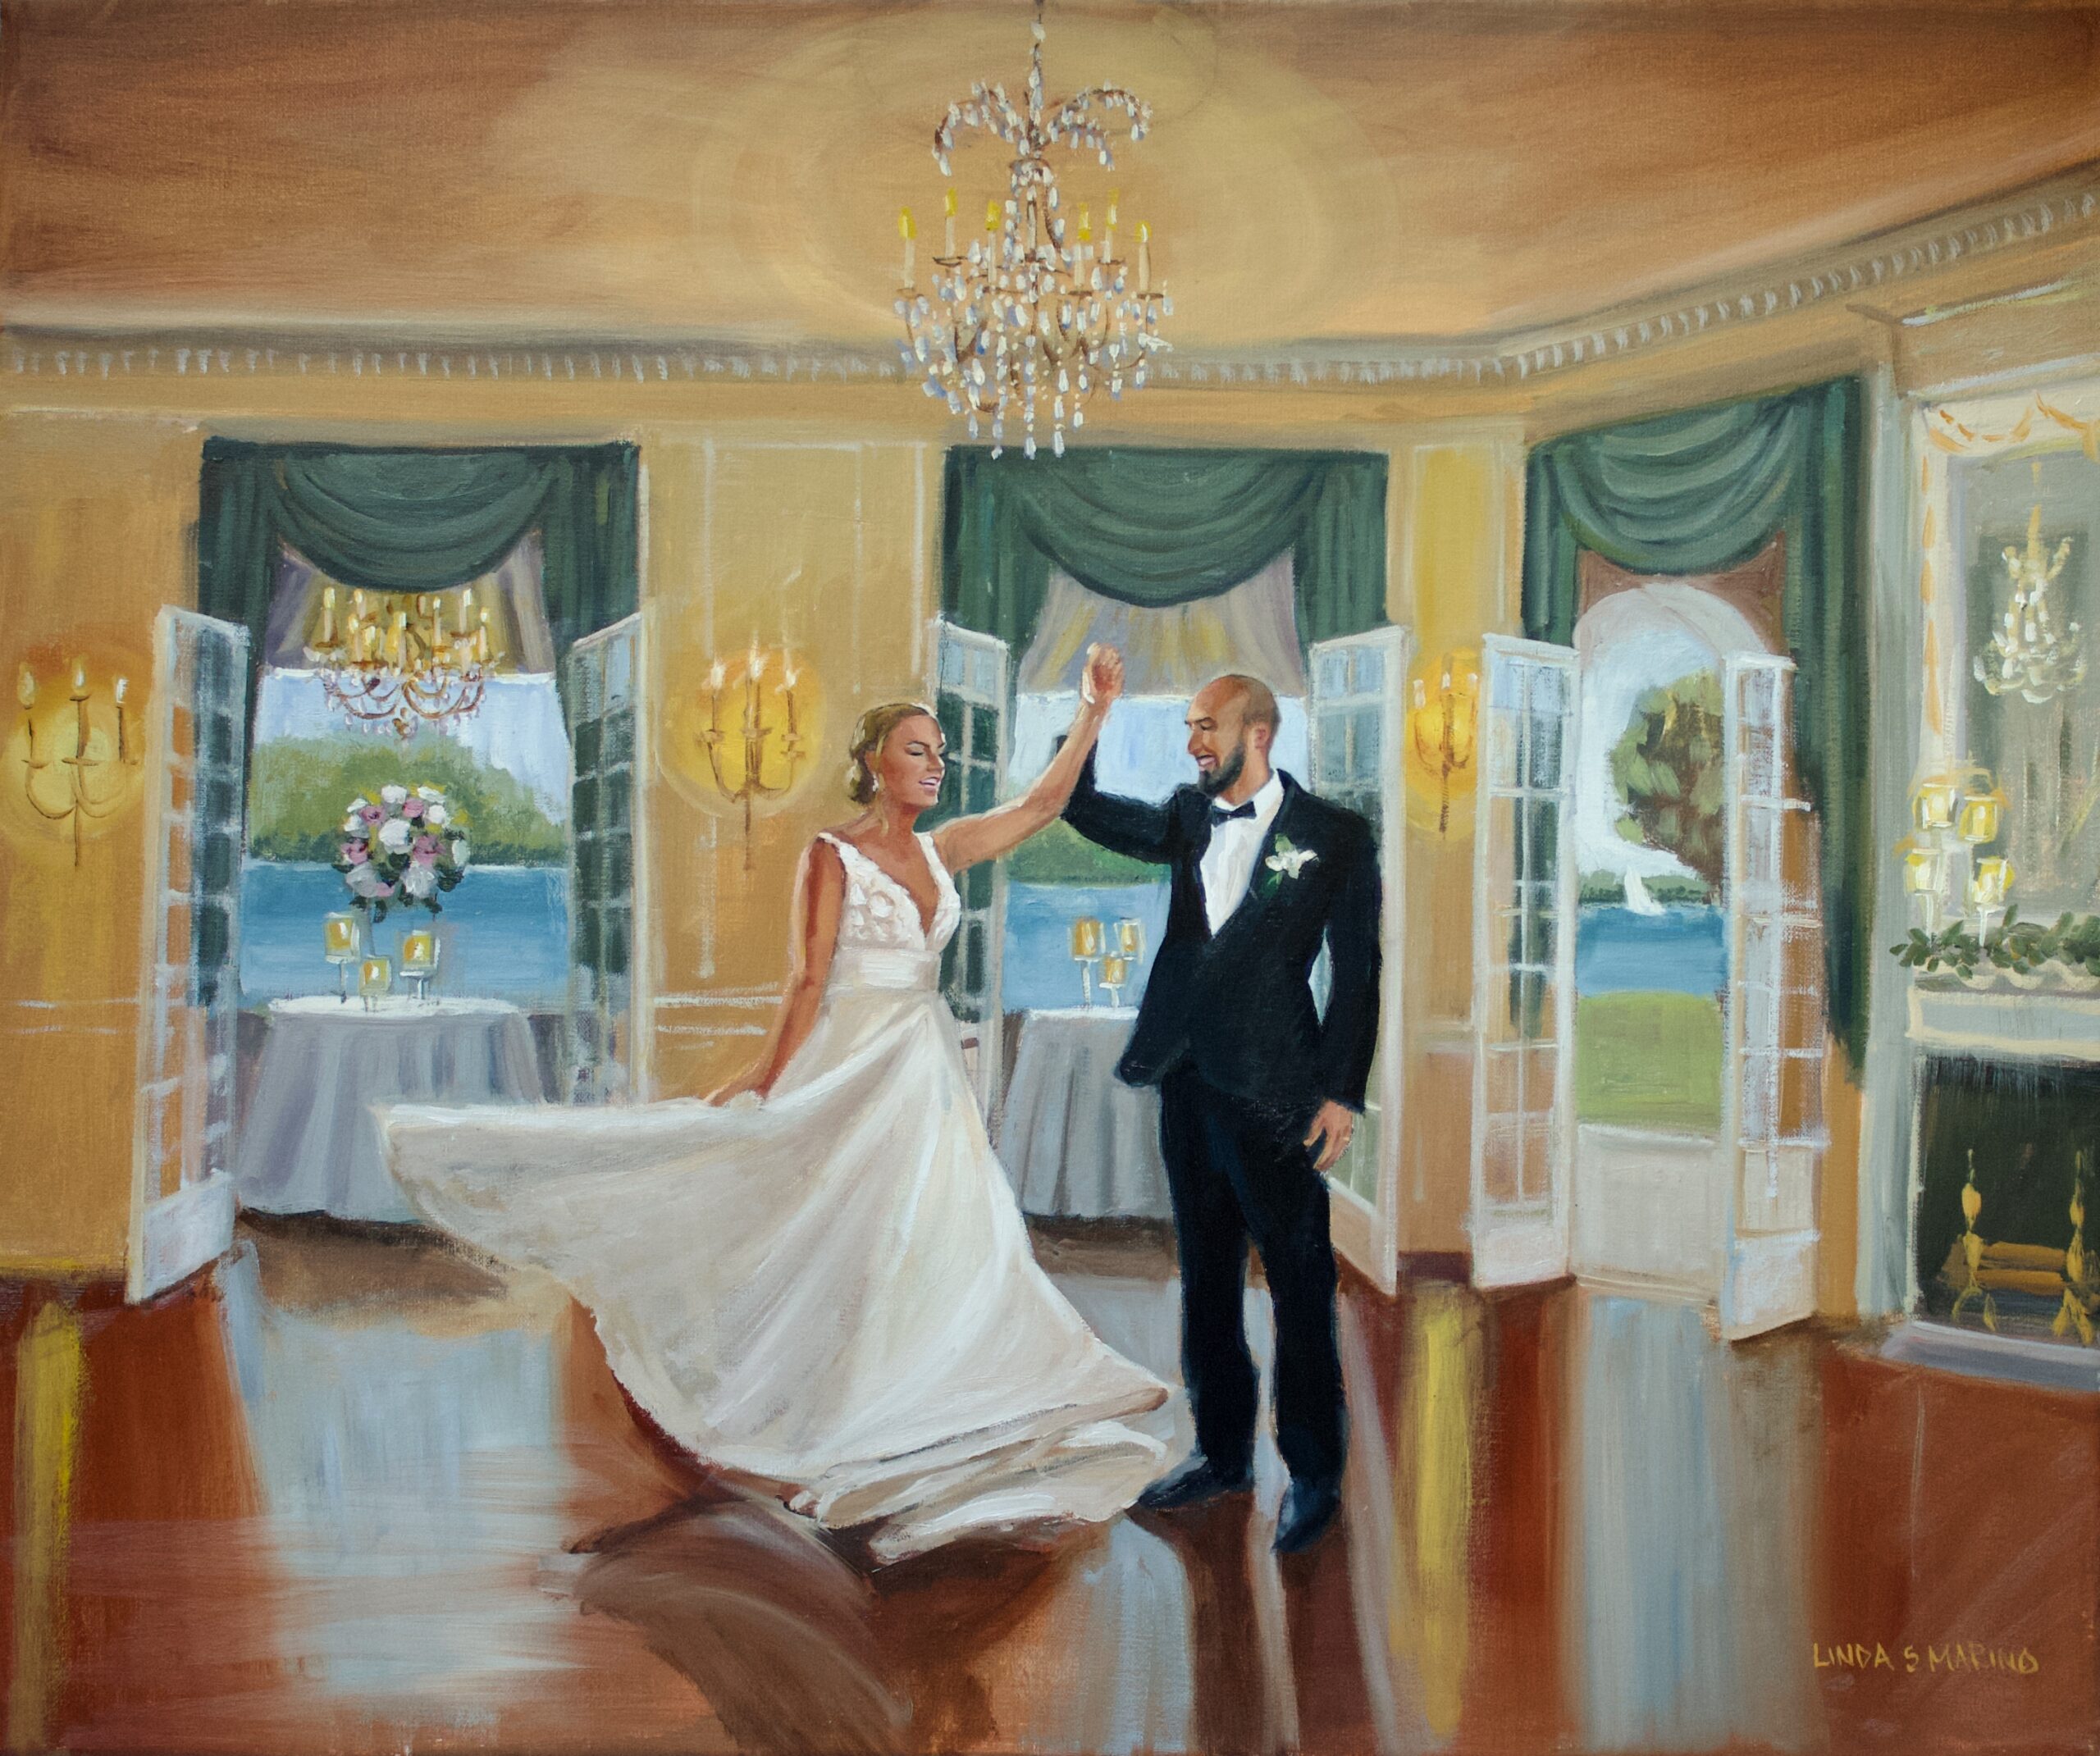 bride and groom dancing in yellow and green ballroom live wedding painting by linda marino